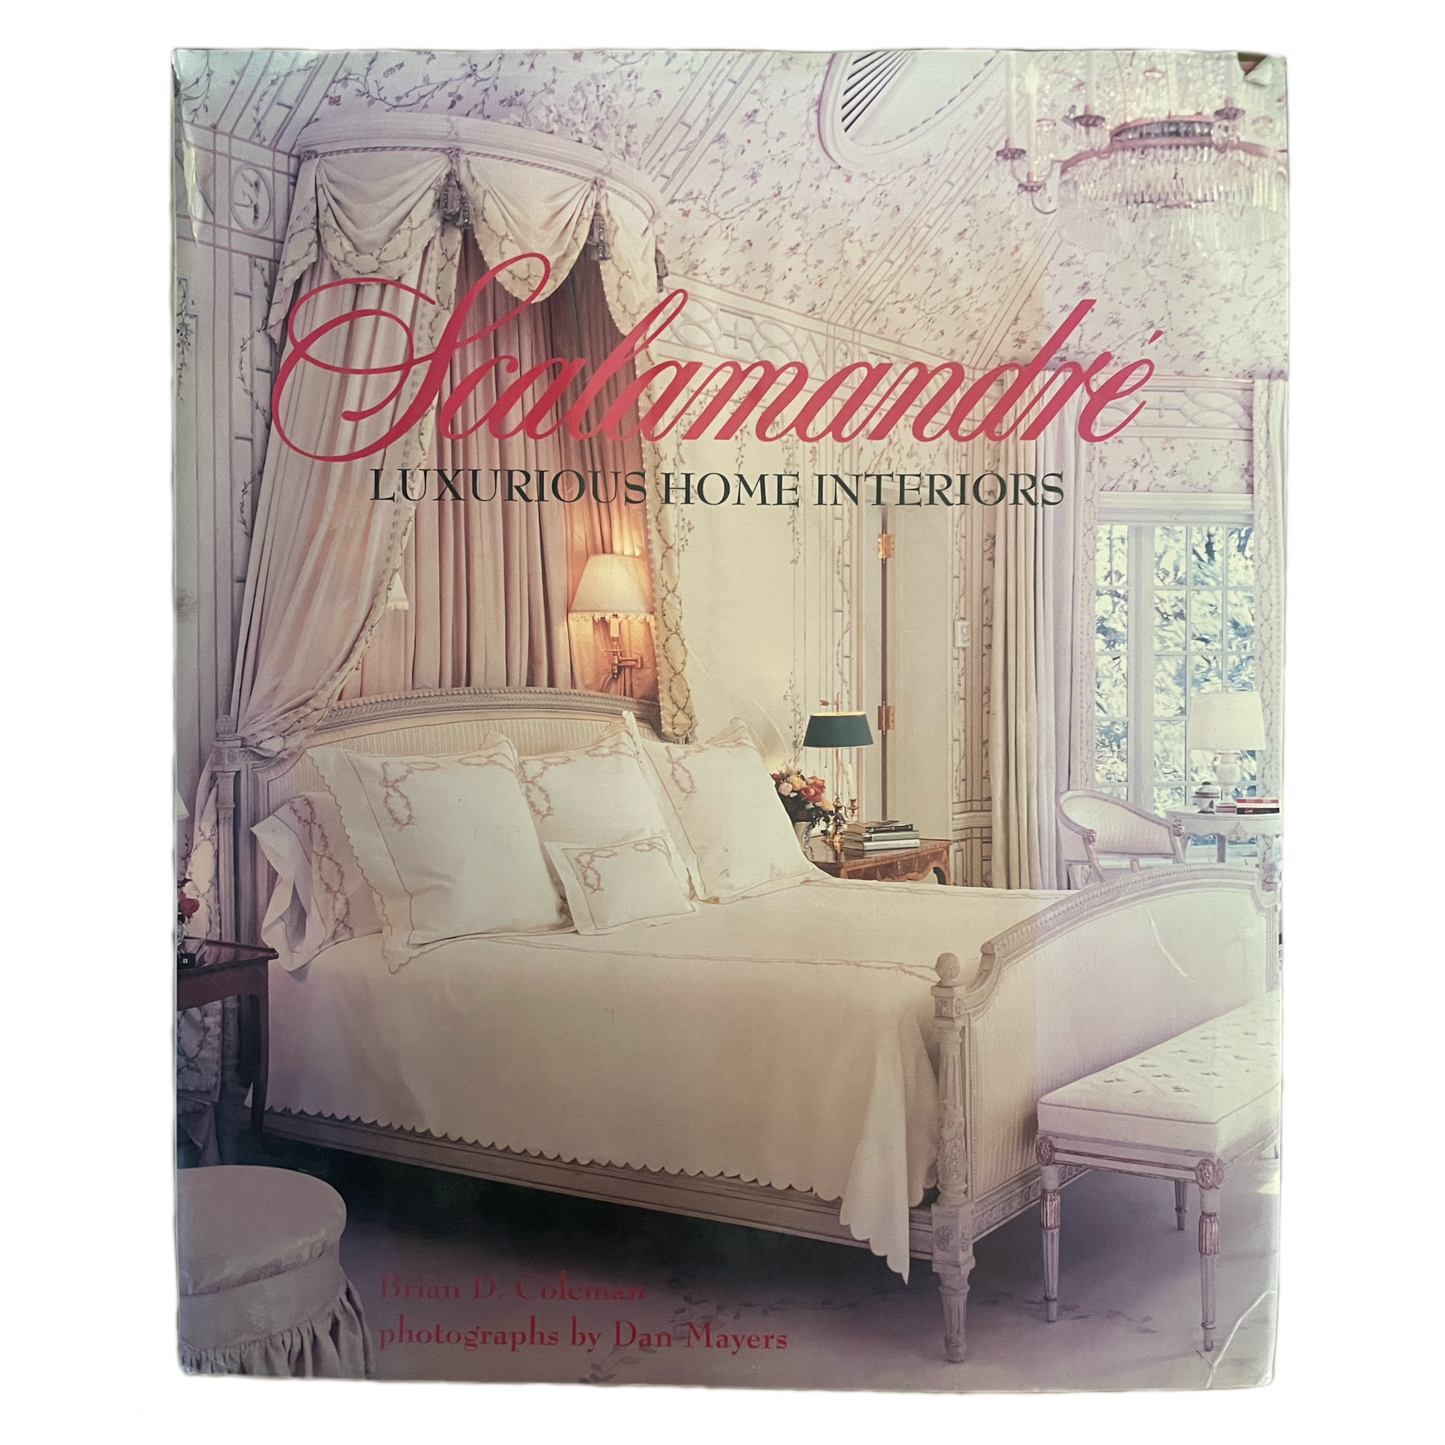 Scalamandré: Luxurious Home Interiors by Brian D. Coleman